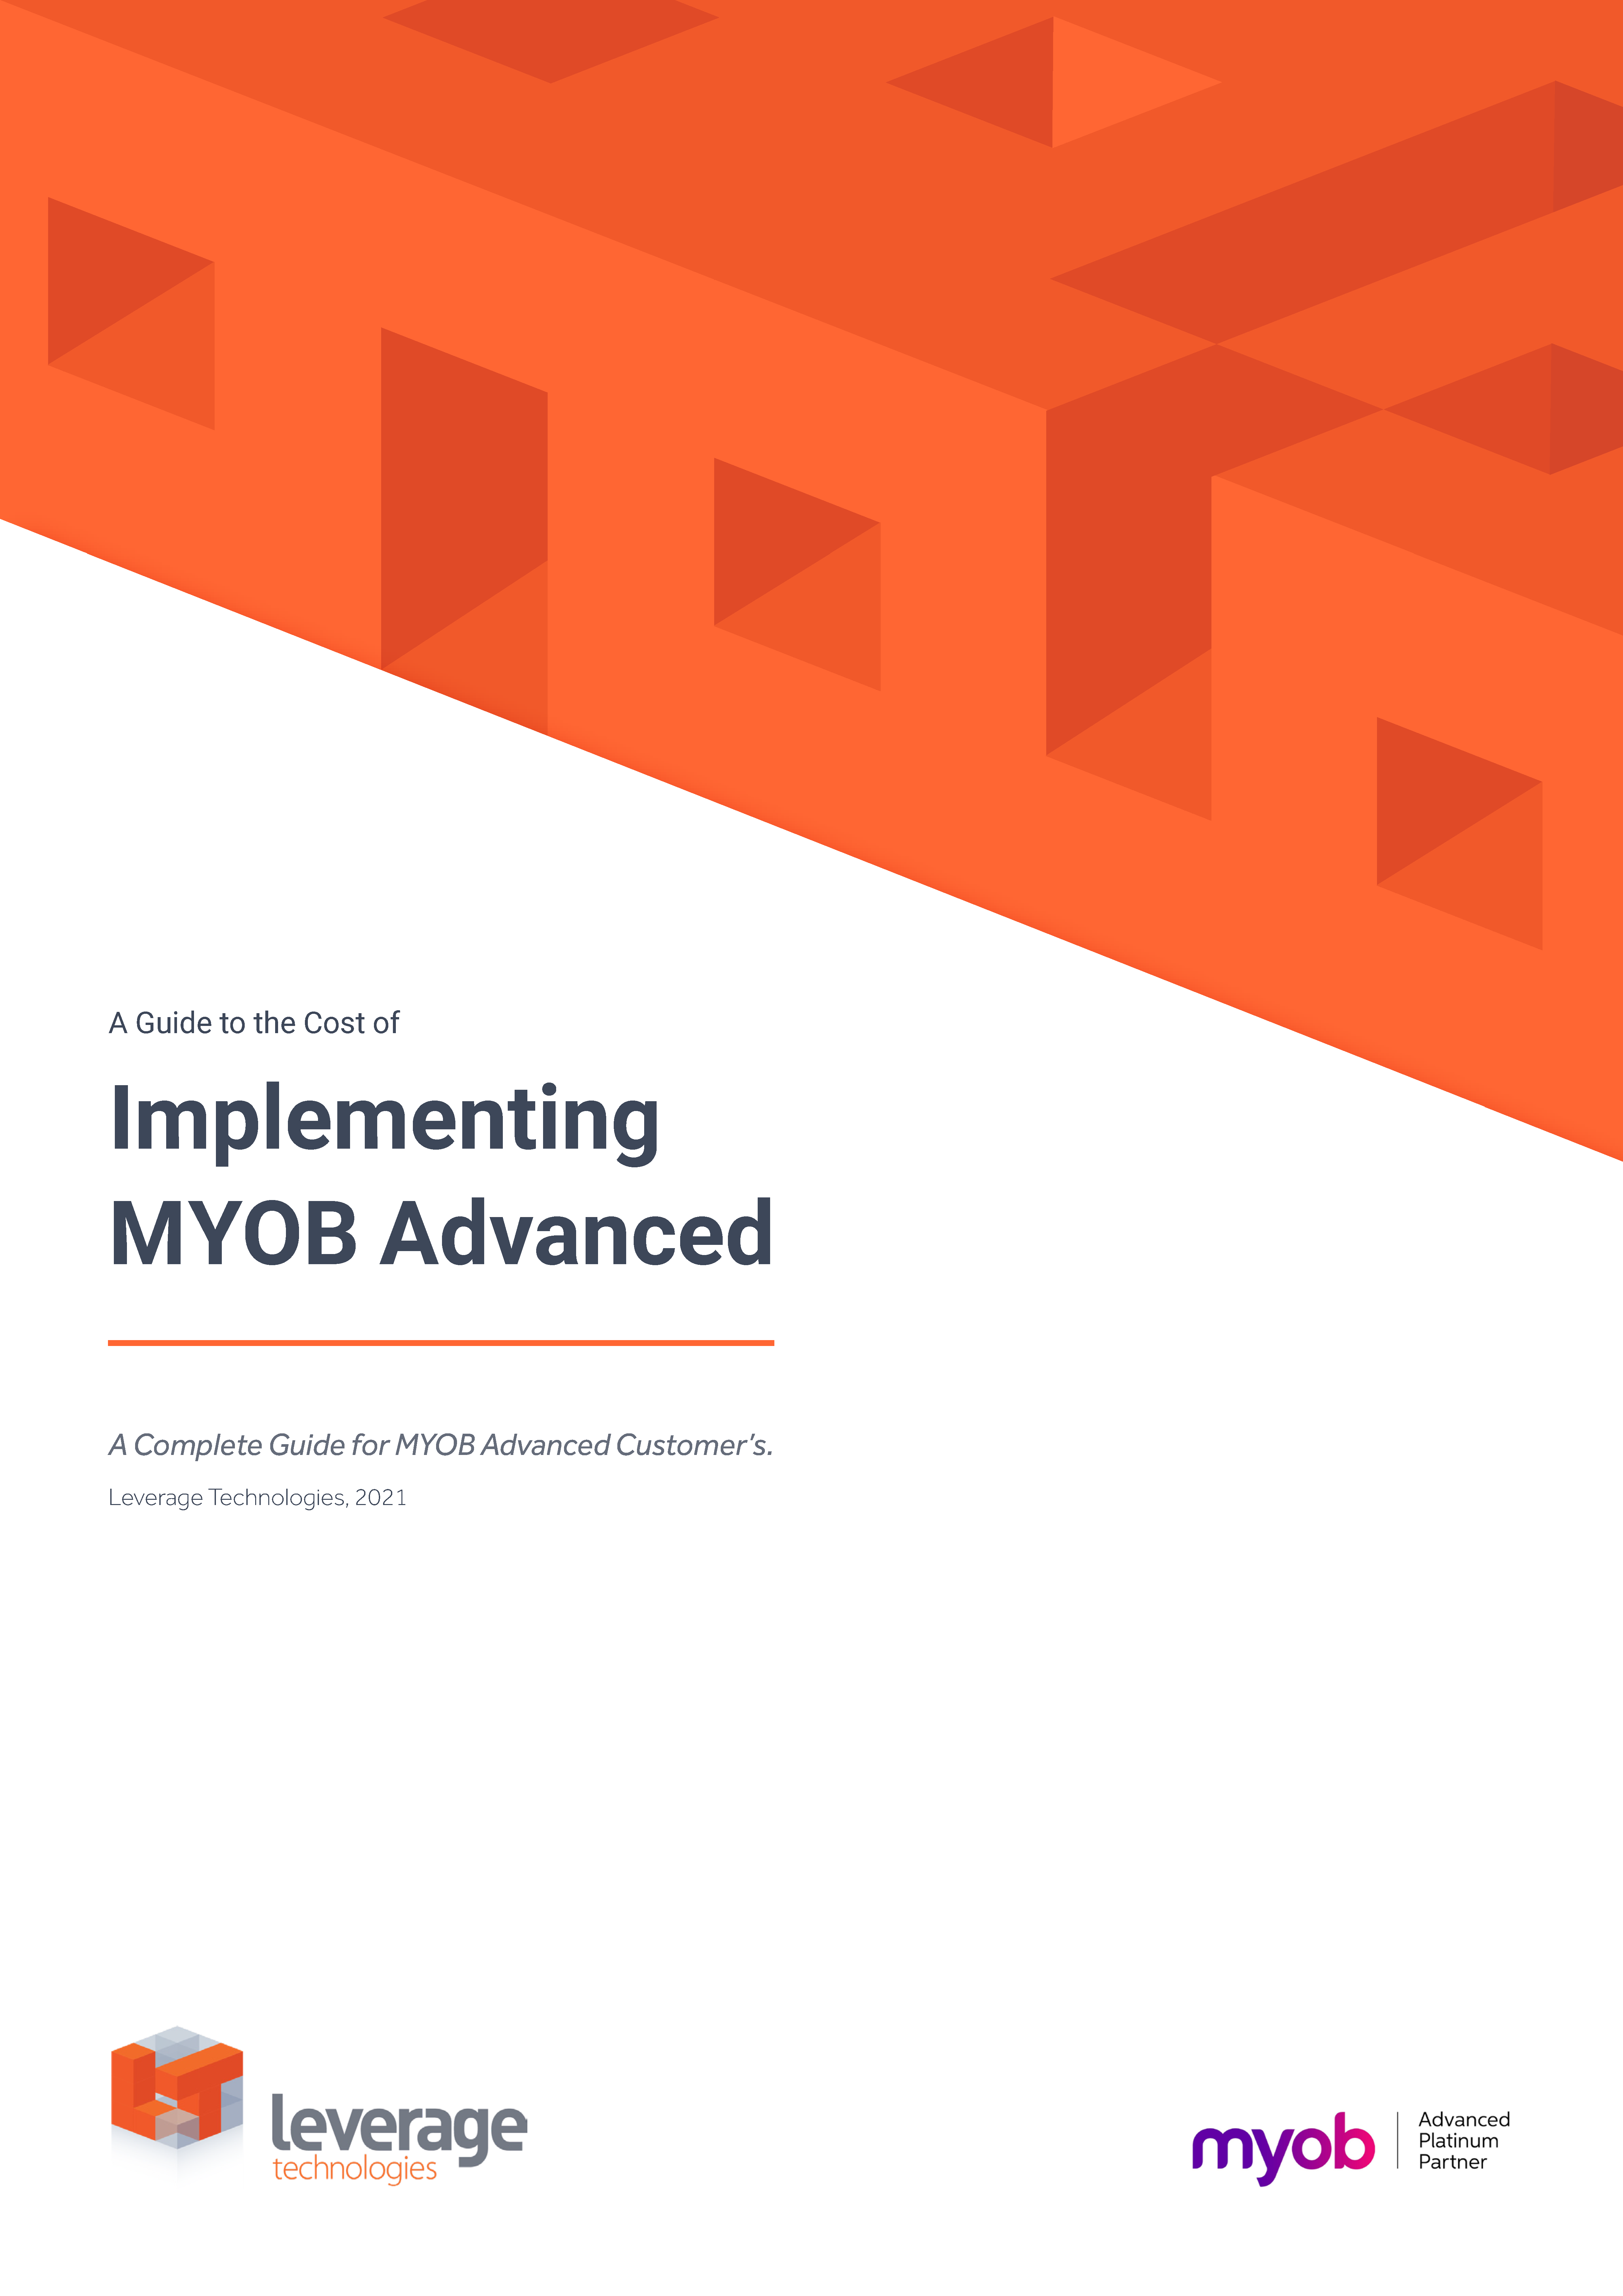 Cost of Implementing MYOB Advanced Guide